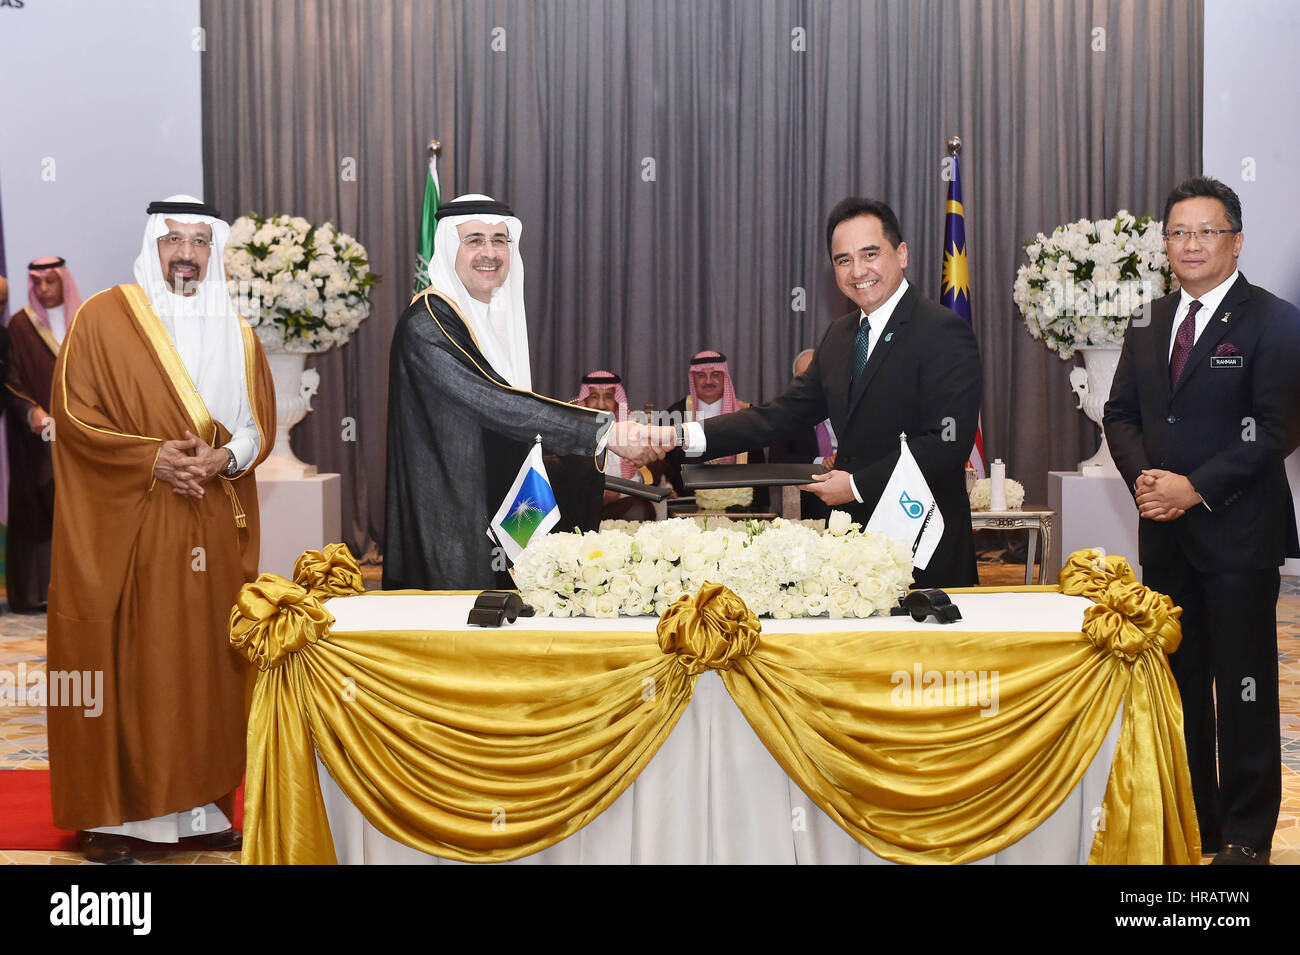 Kuala Lumpur. 28th Feb, 2017. Saudi Aramco's CEO Amin H. Nasser (2nd L) shakes hands with Petronas chief Wan Zulkiflee Wan Ariffin (2nd R) during a signing ceremony in Kuala Lumpur, Malaysia, on Feb. 28, 2017. Saudi Aramco and Petronas, the two national oil companies from Saudi Arabia and Malaysia respectively, entered into a 50-50 partnership on Tuesday. Saudi Aramco will invest 7 billion U.S. dollars in a refinery in the southern Malaysian state of Johor, called Refinery and Petrochemical Integrated Development, or RAPID. Credit: Xinhua/Alamy Live News Stock Photo